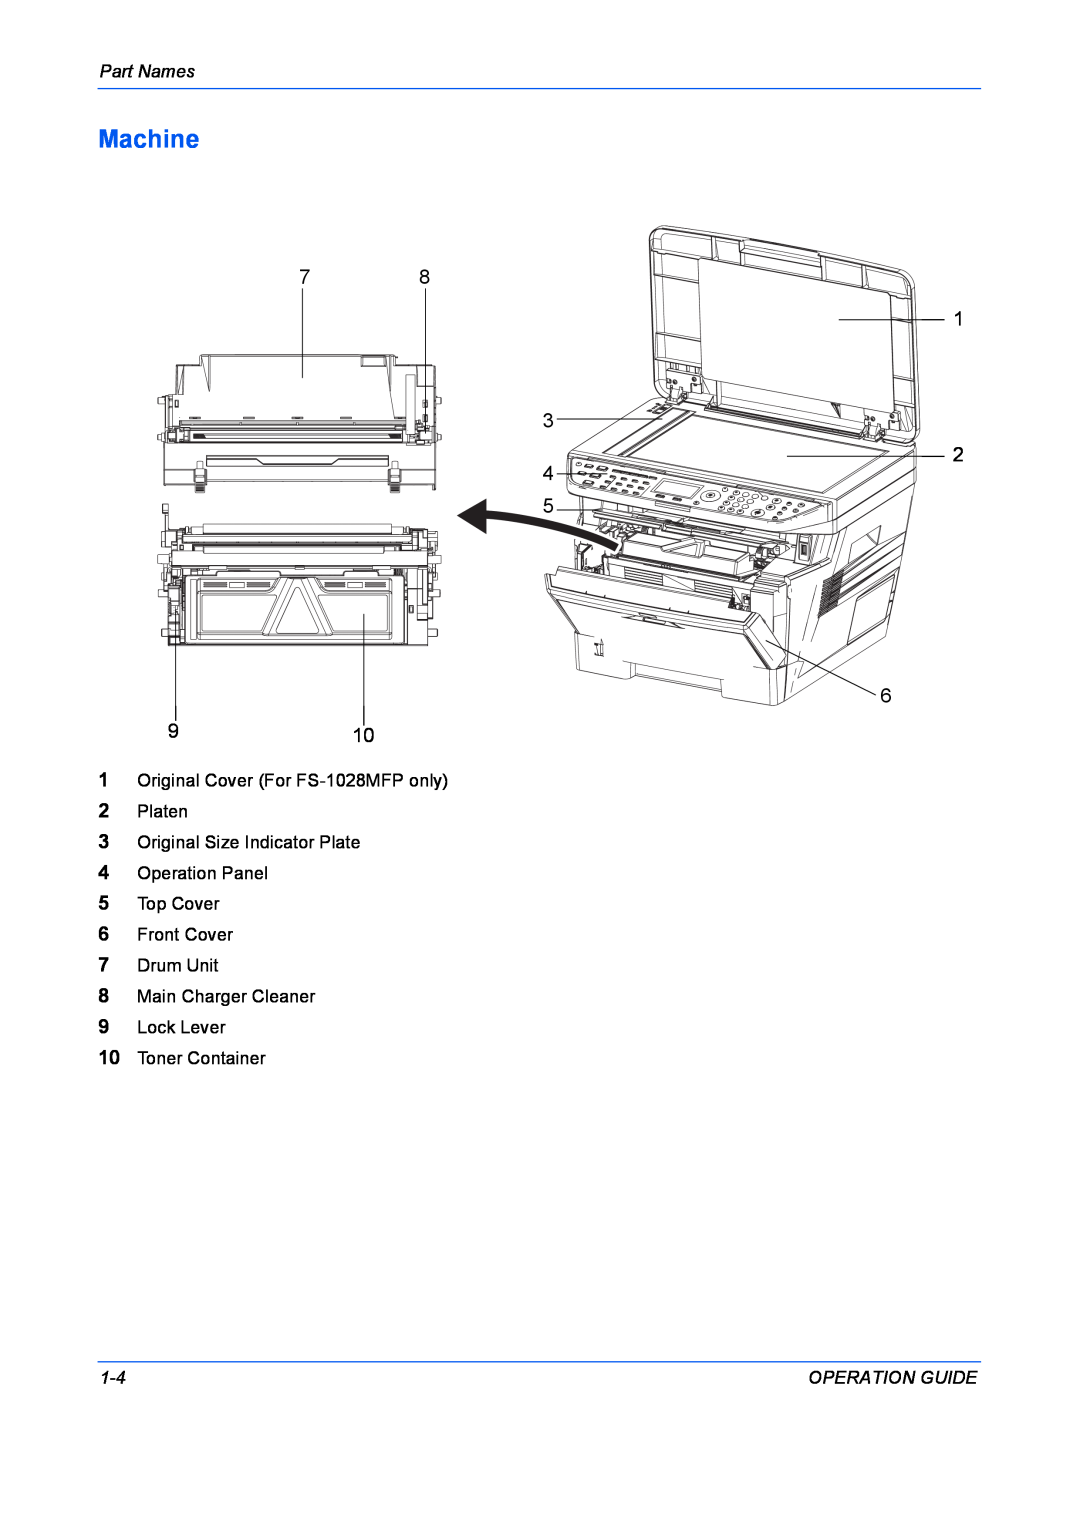 Kyocera FS-1128MFP Machine, Part Names, Original Cover For FS-1028MFP only 2 Platen, Toner Container, Operation Guide 